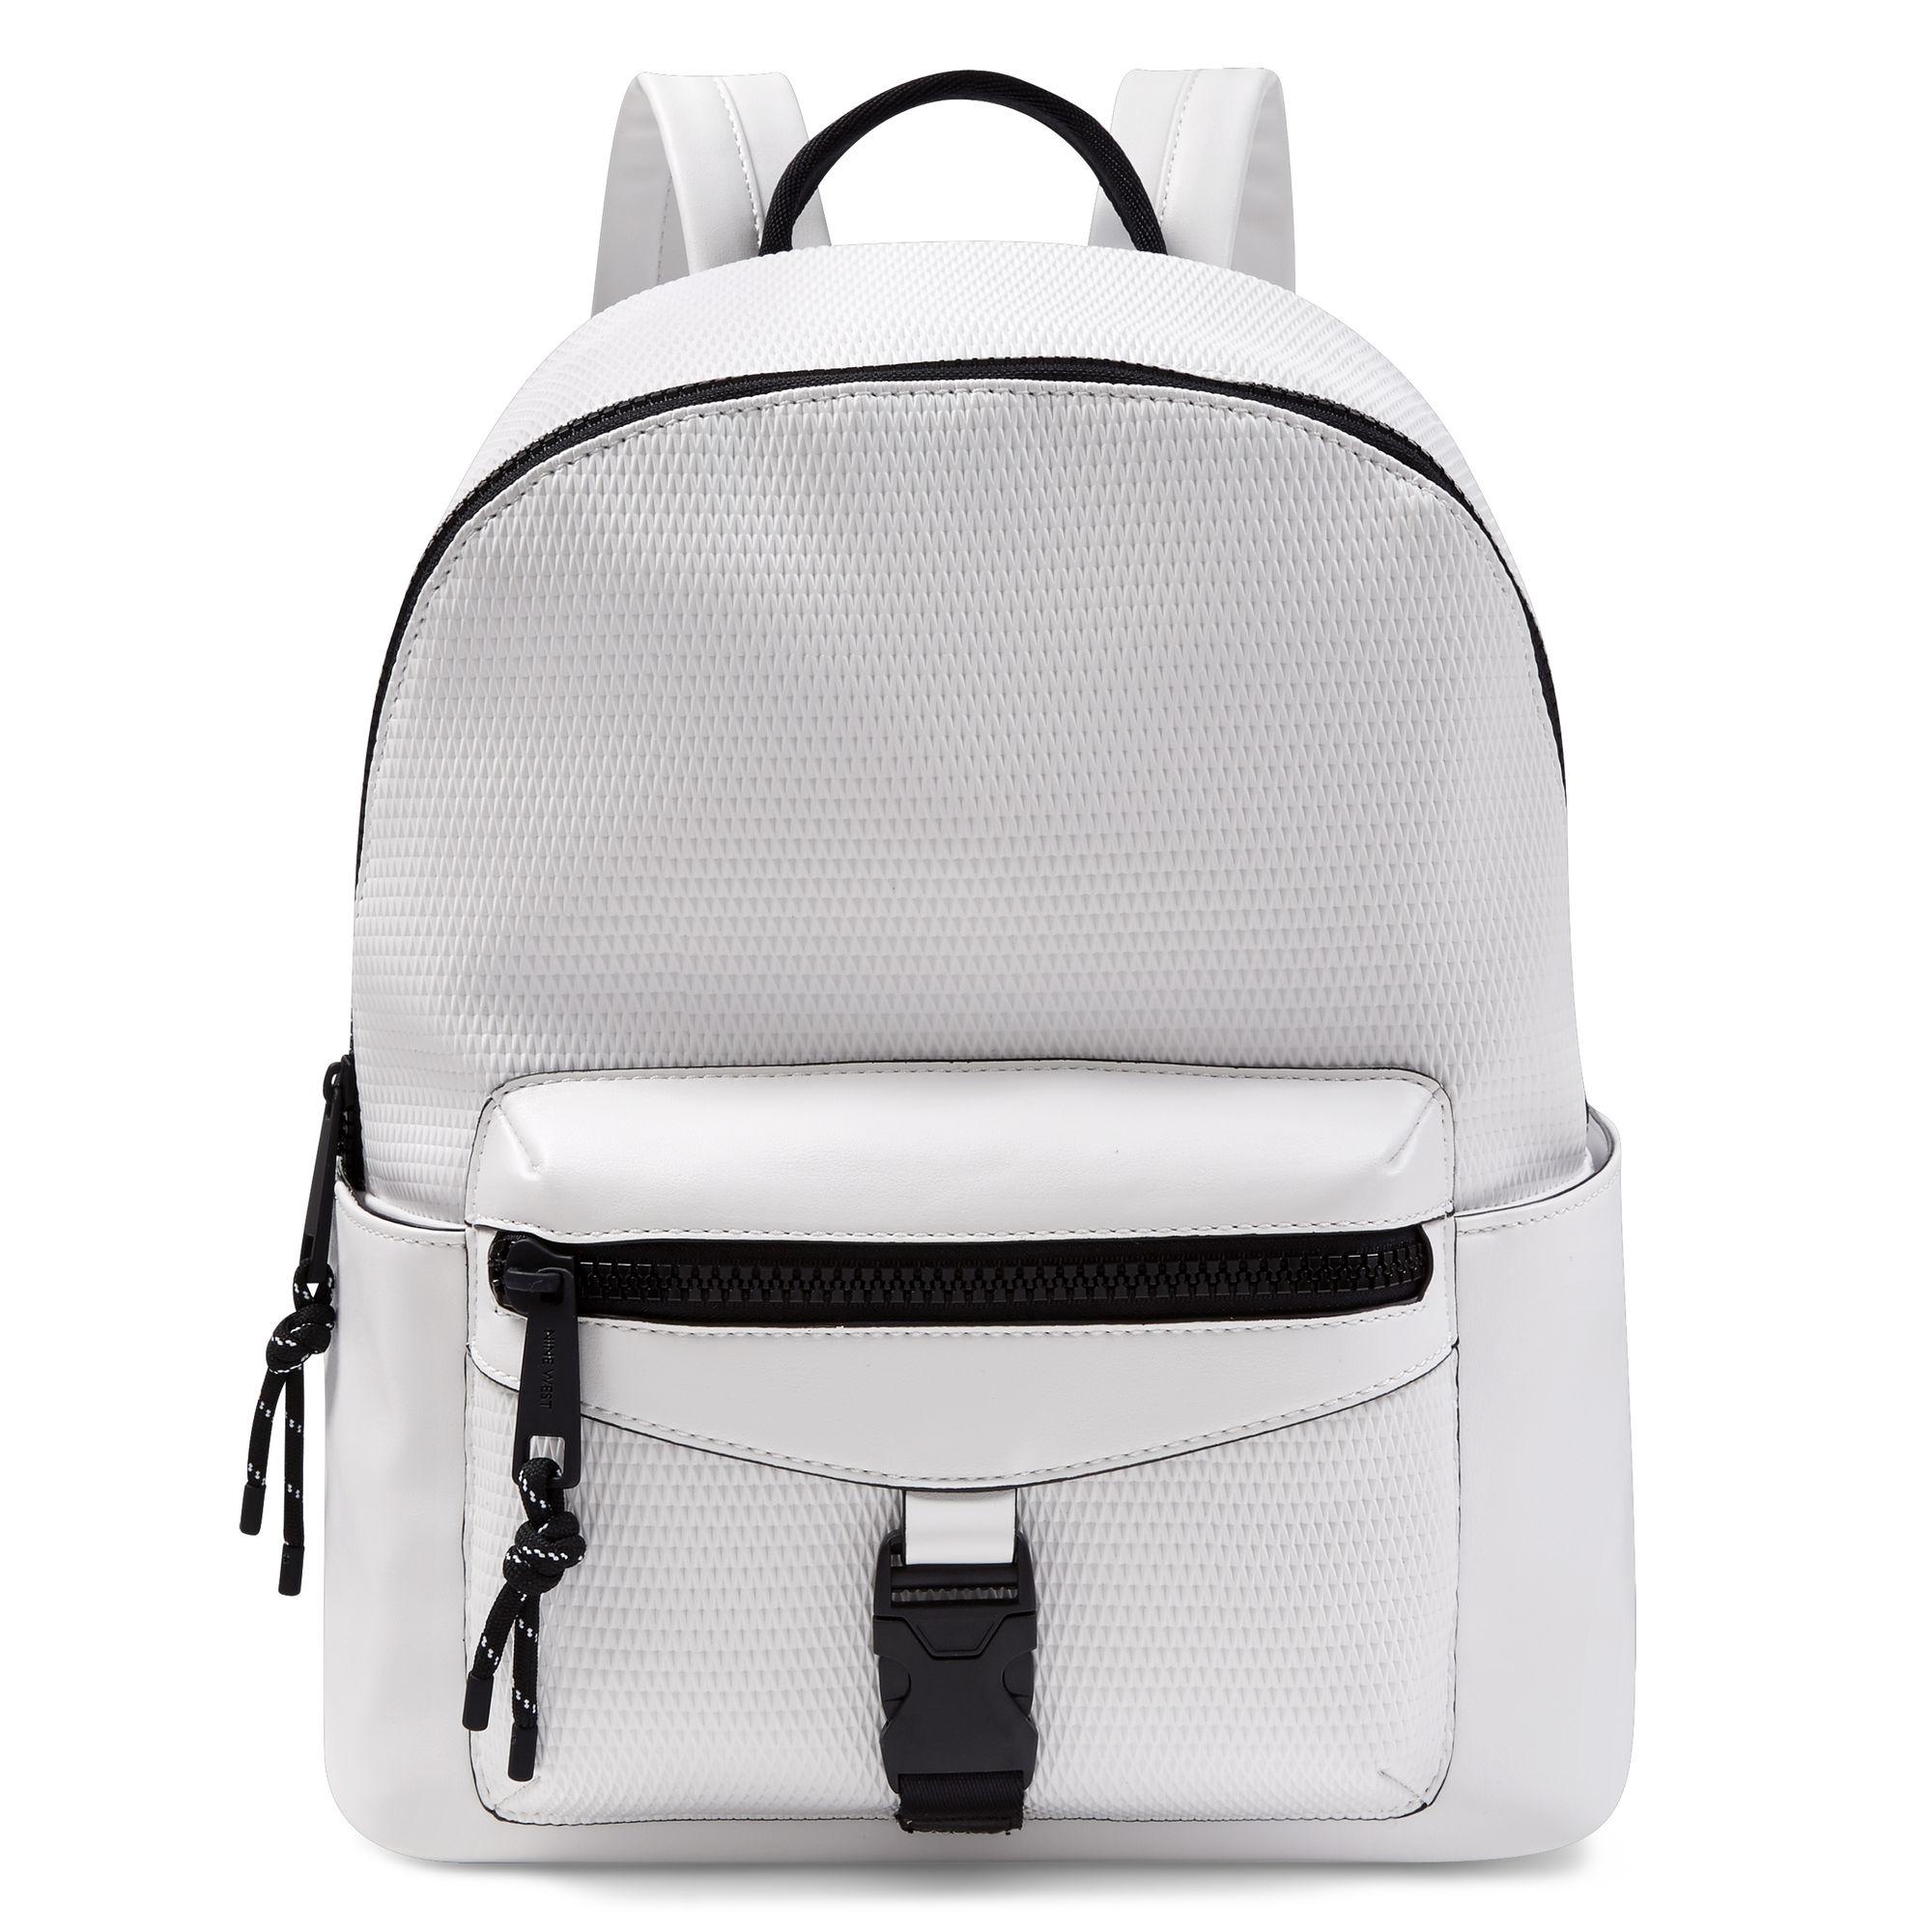 Nine West Lydia Backpack in White - Lyst